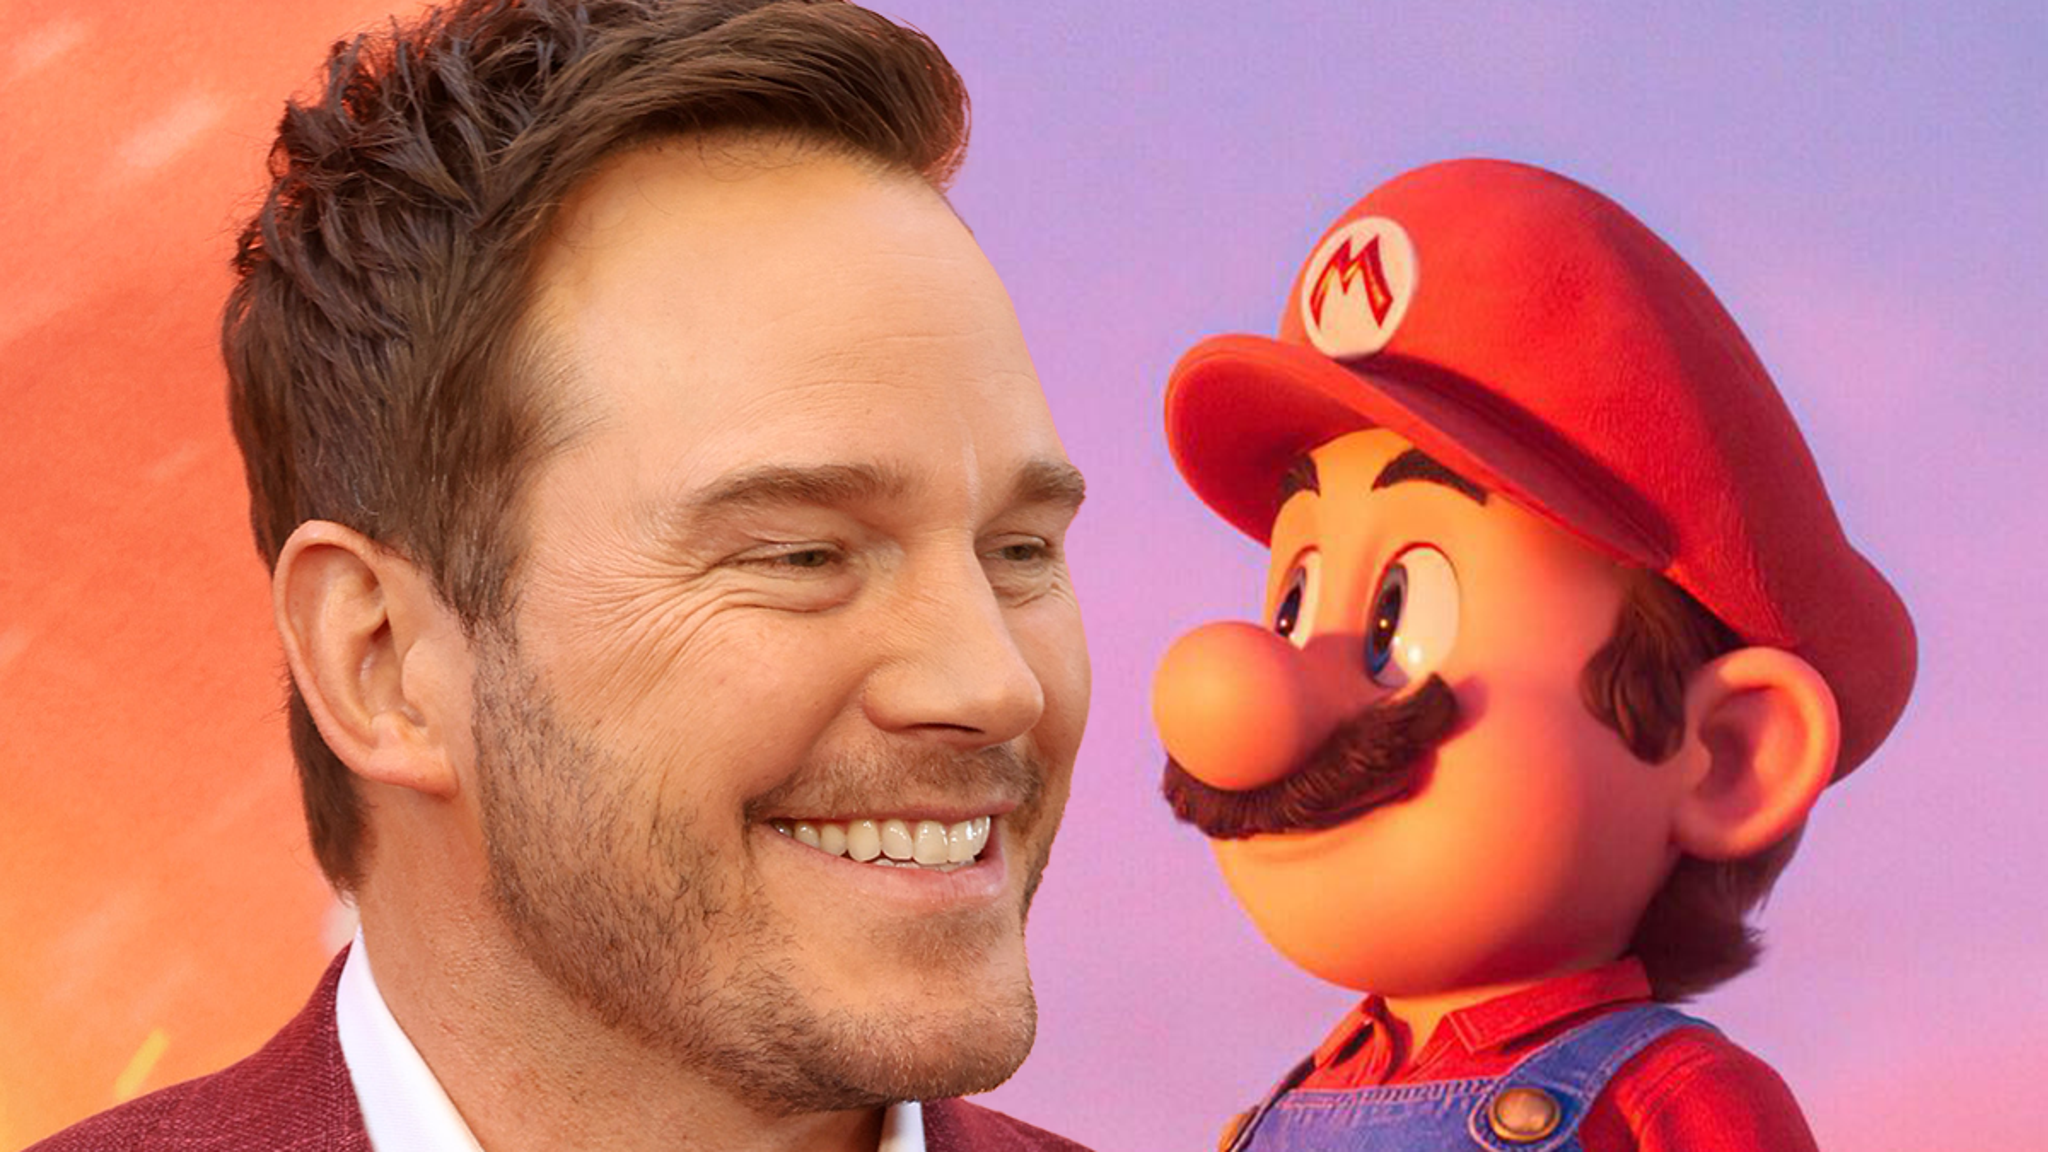 Chris Pratt’s voice as Mario in the new movie isn’t terrible, the internet decides